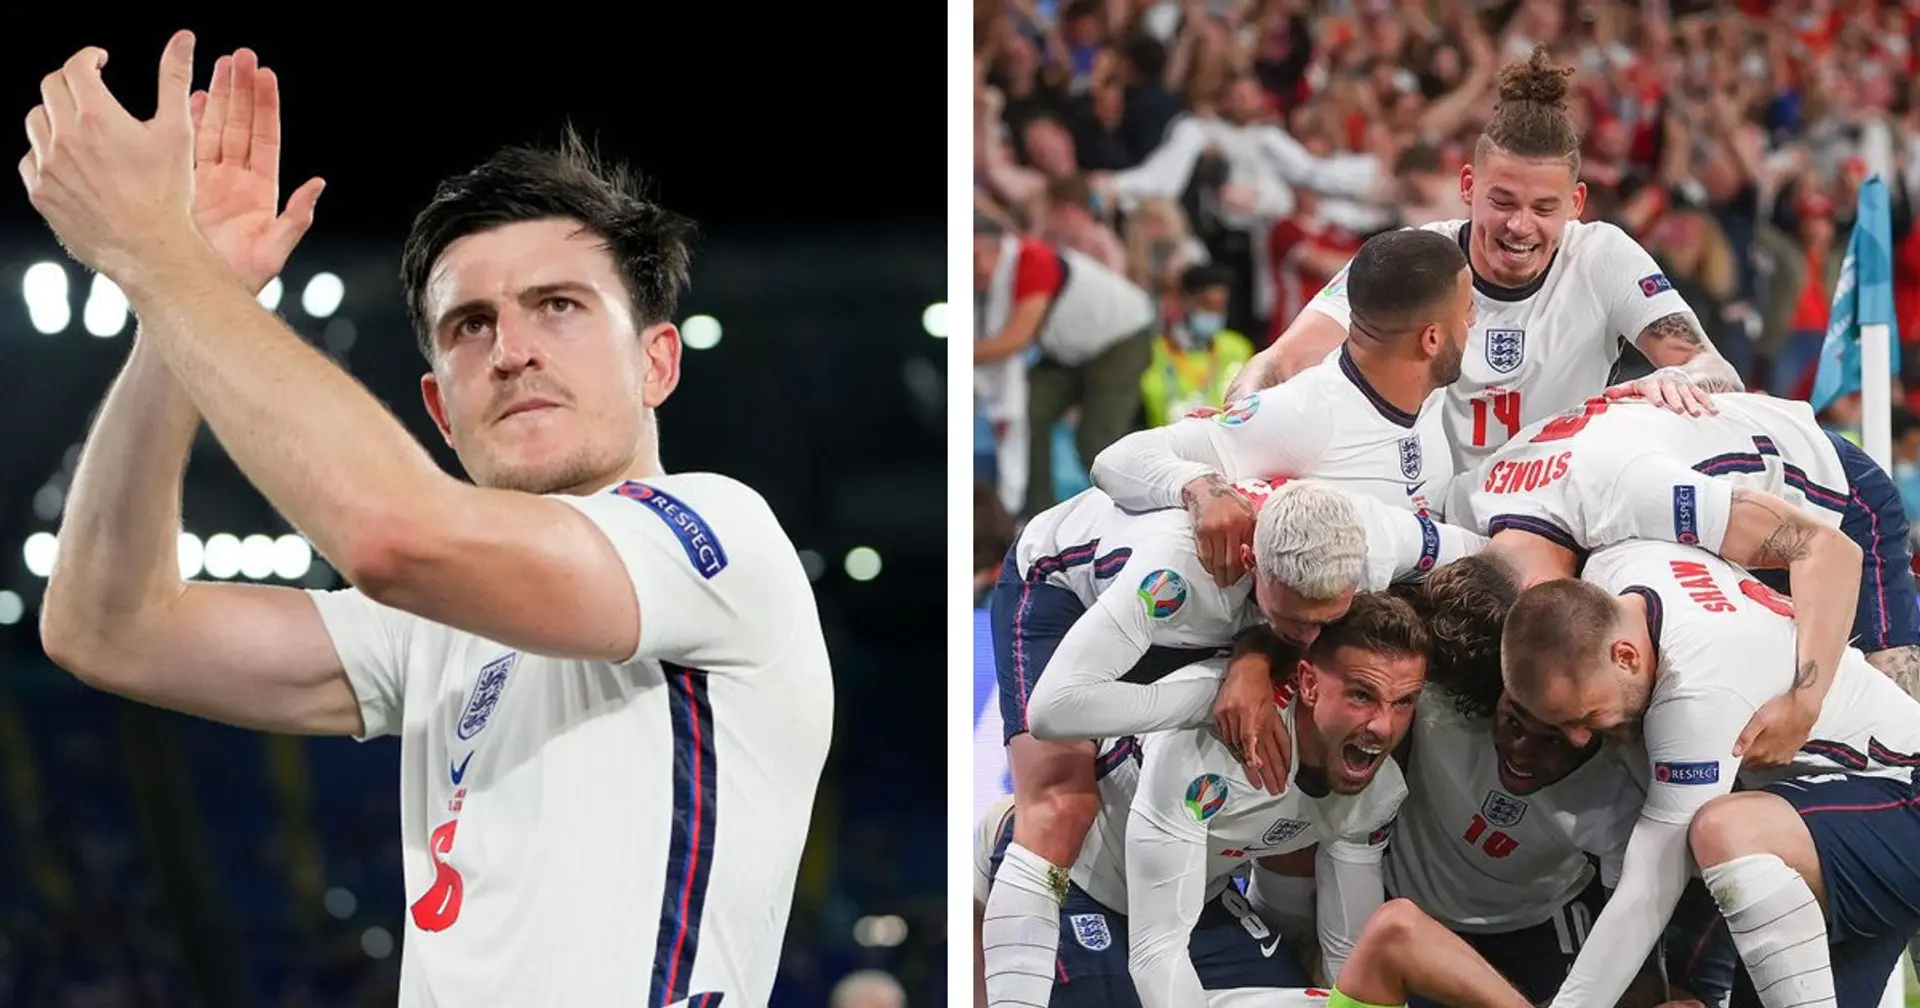 4 United stars progress to Euro 2020 finals after England defeat Denmark